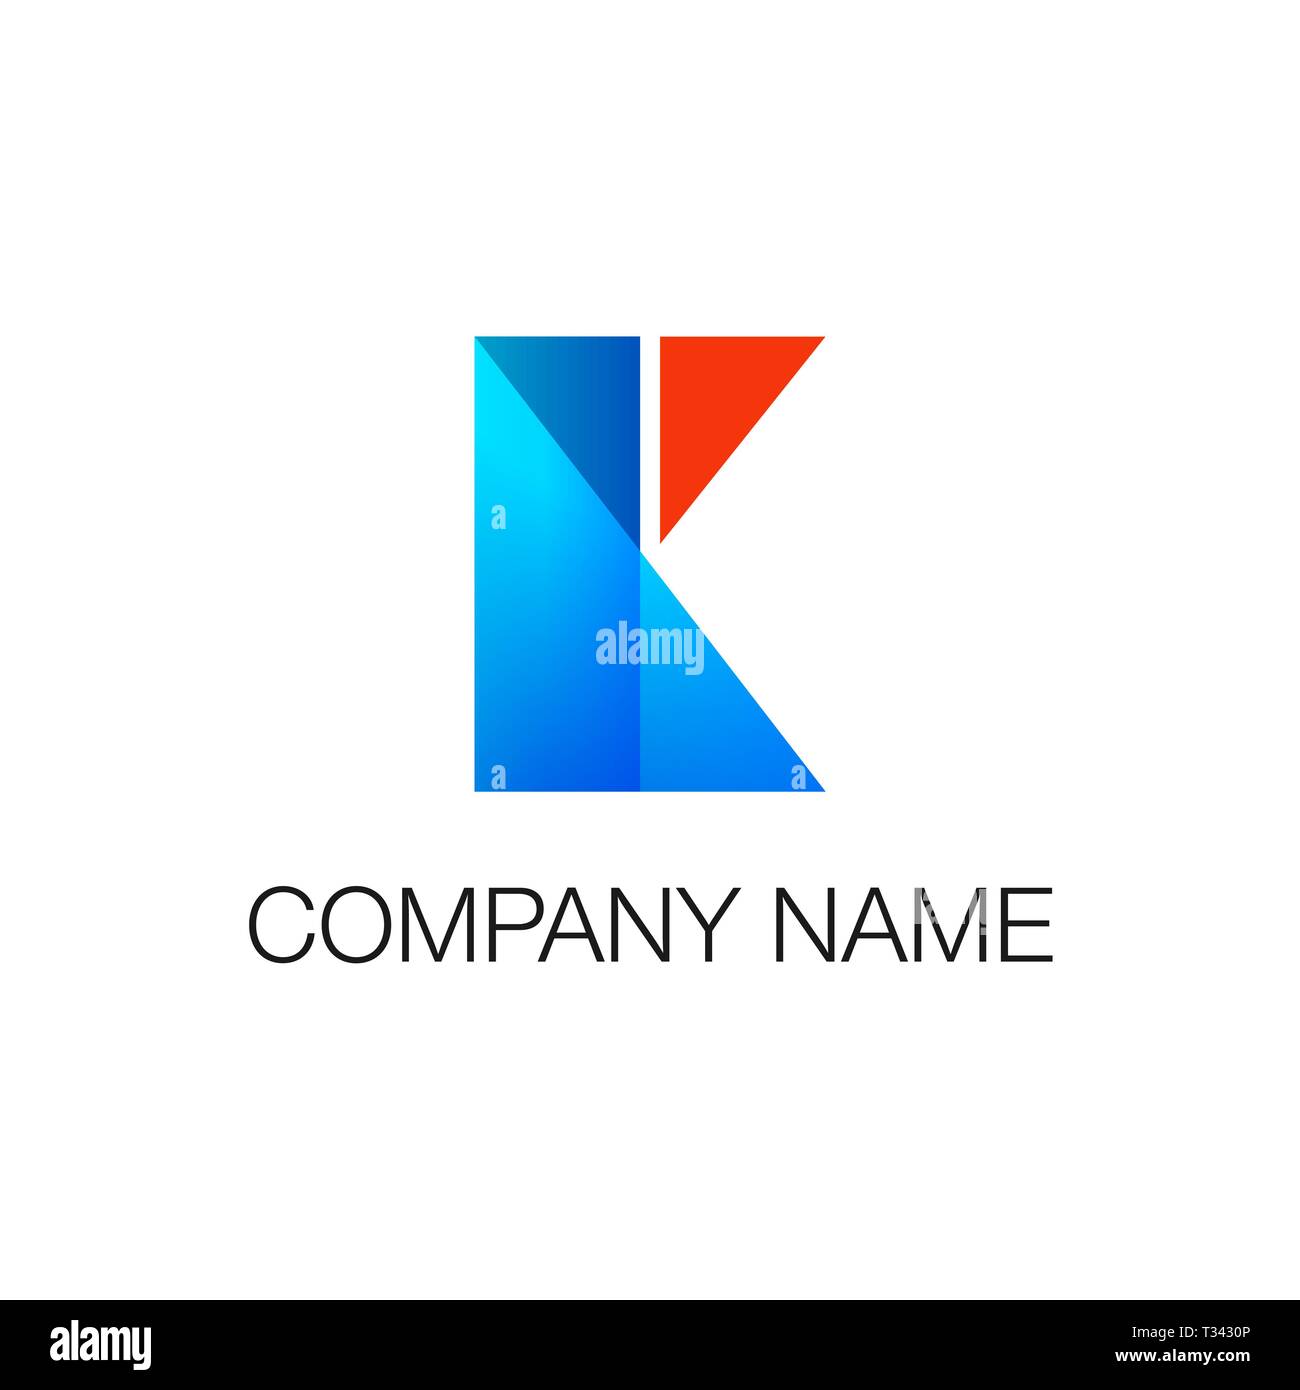 Logotype. Geometric shapes rectangle and triangle blue and red colors as letter K. Vector illustration isolated on white Stock Vector